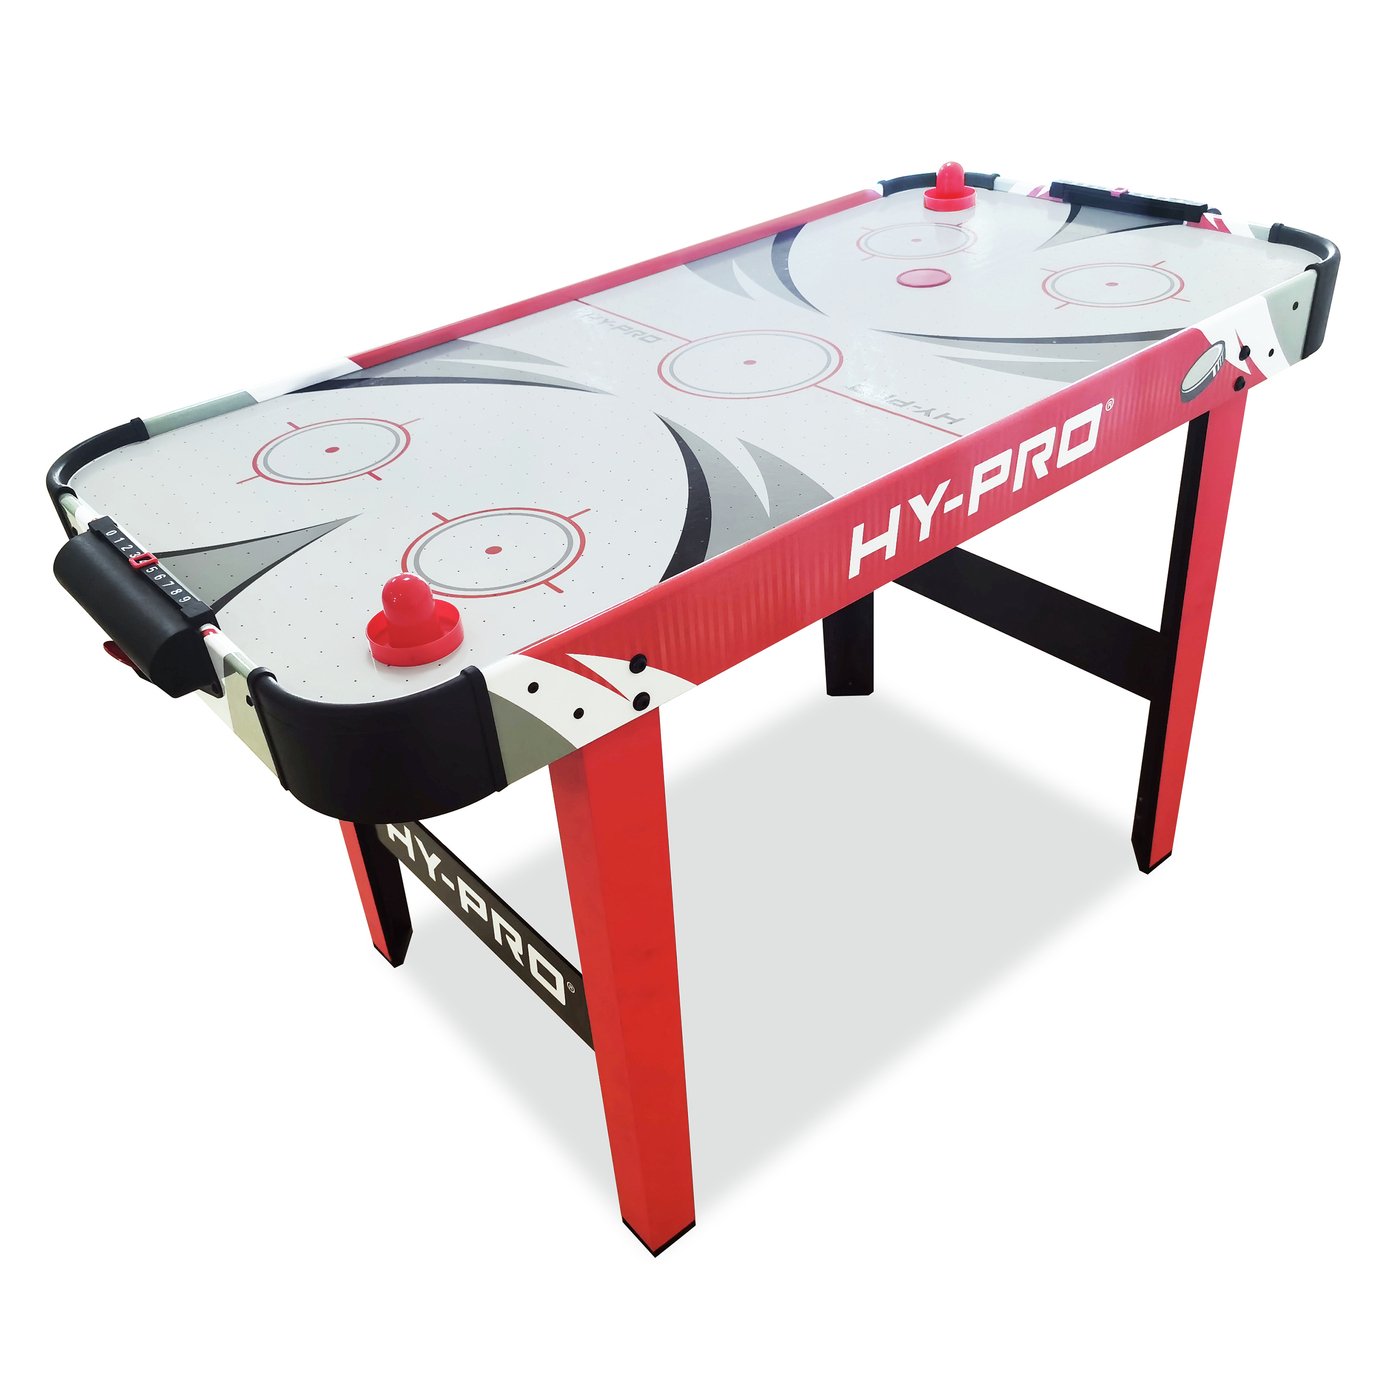 Hy-Pro Entry 4ft Air Hockey Table Review